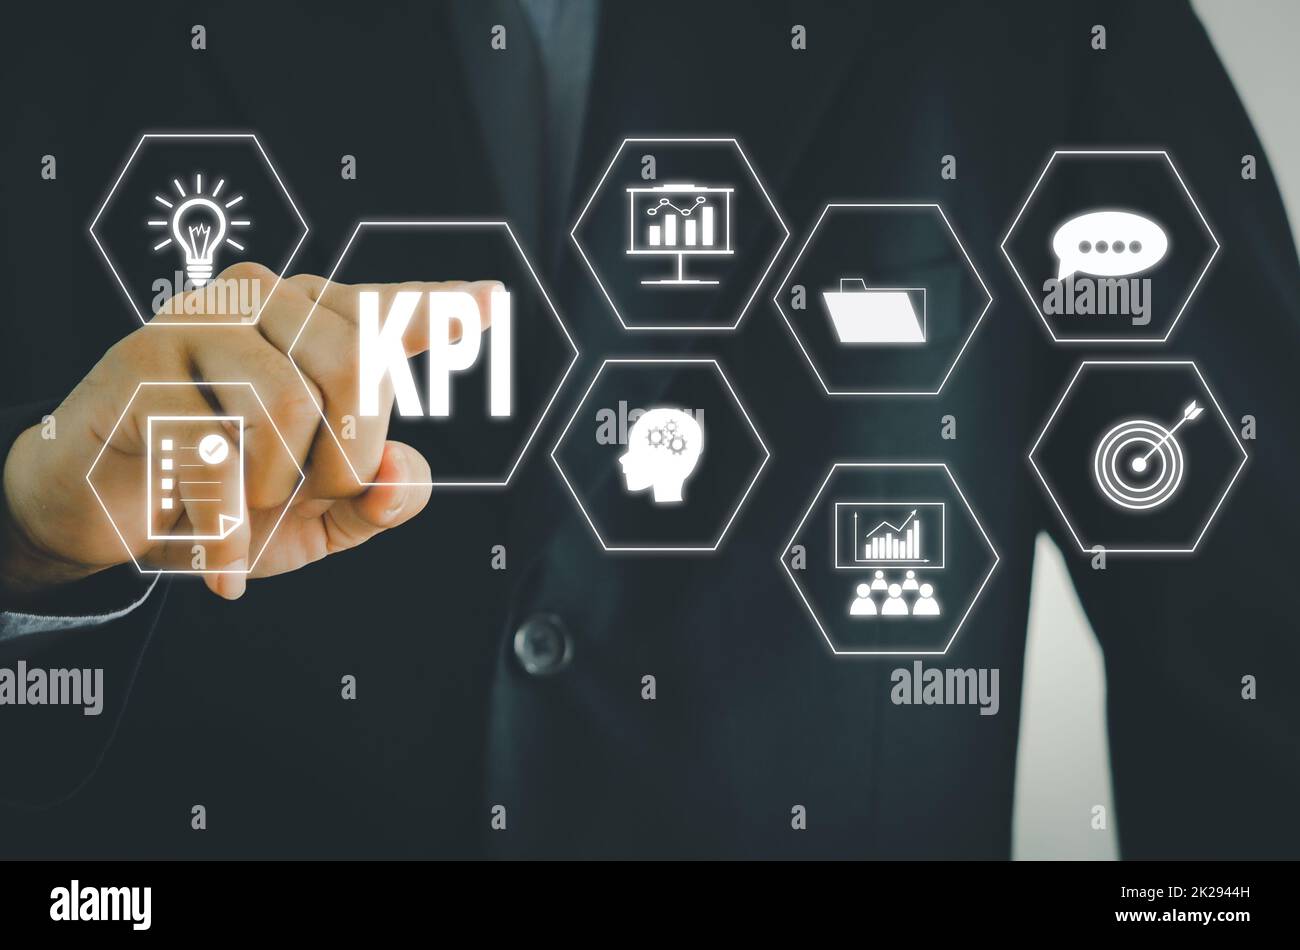 Key Performance Indicator KPI.businessman touch icon digital screen interface.Business Technology and network concept. Stock Photo